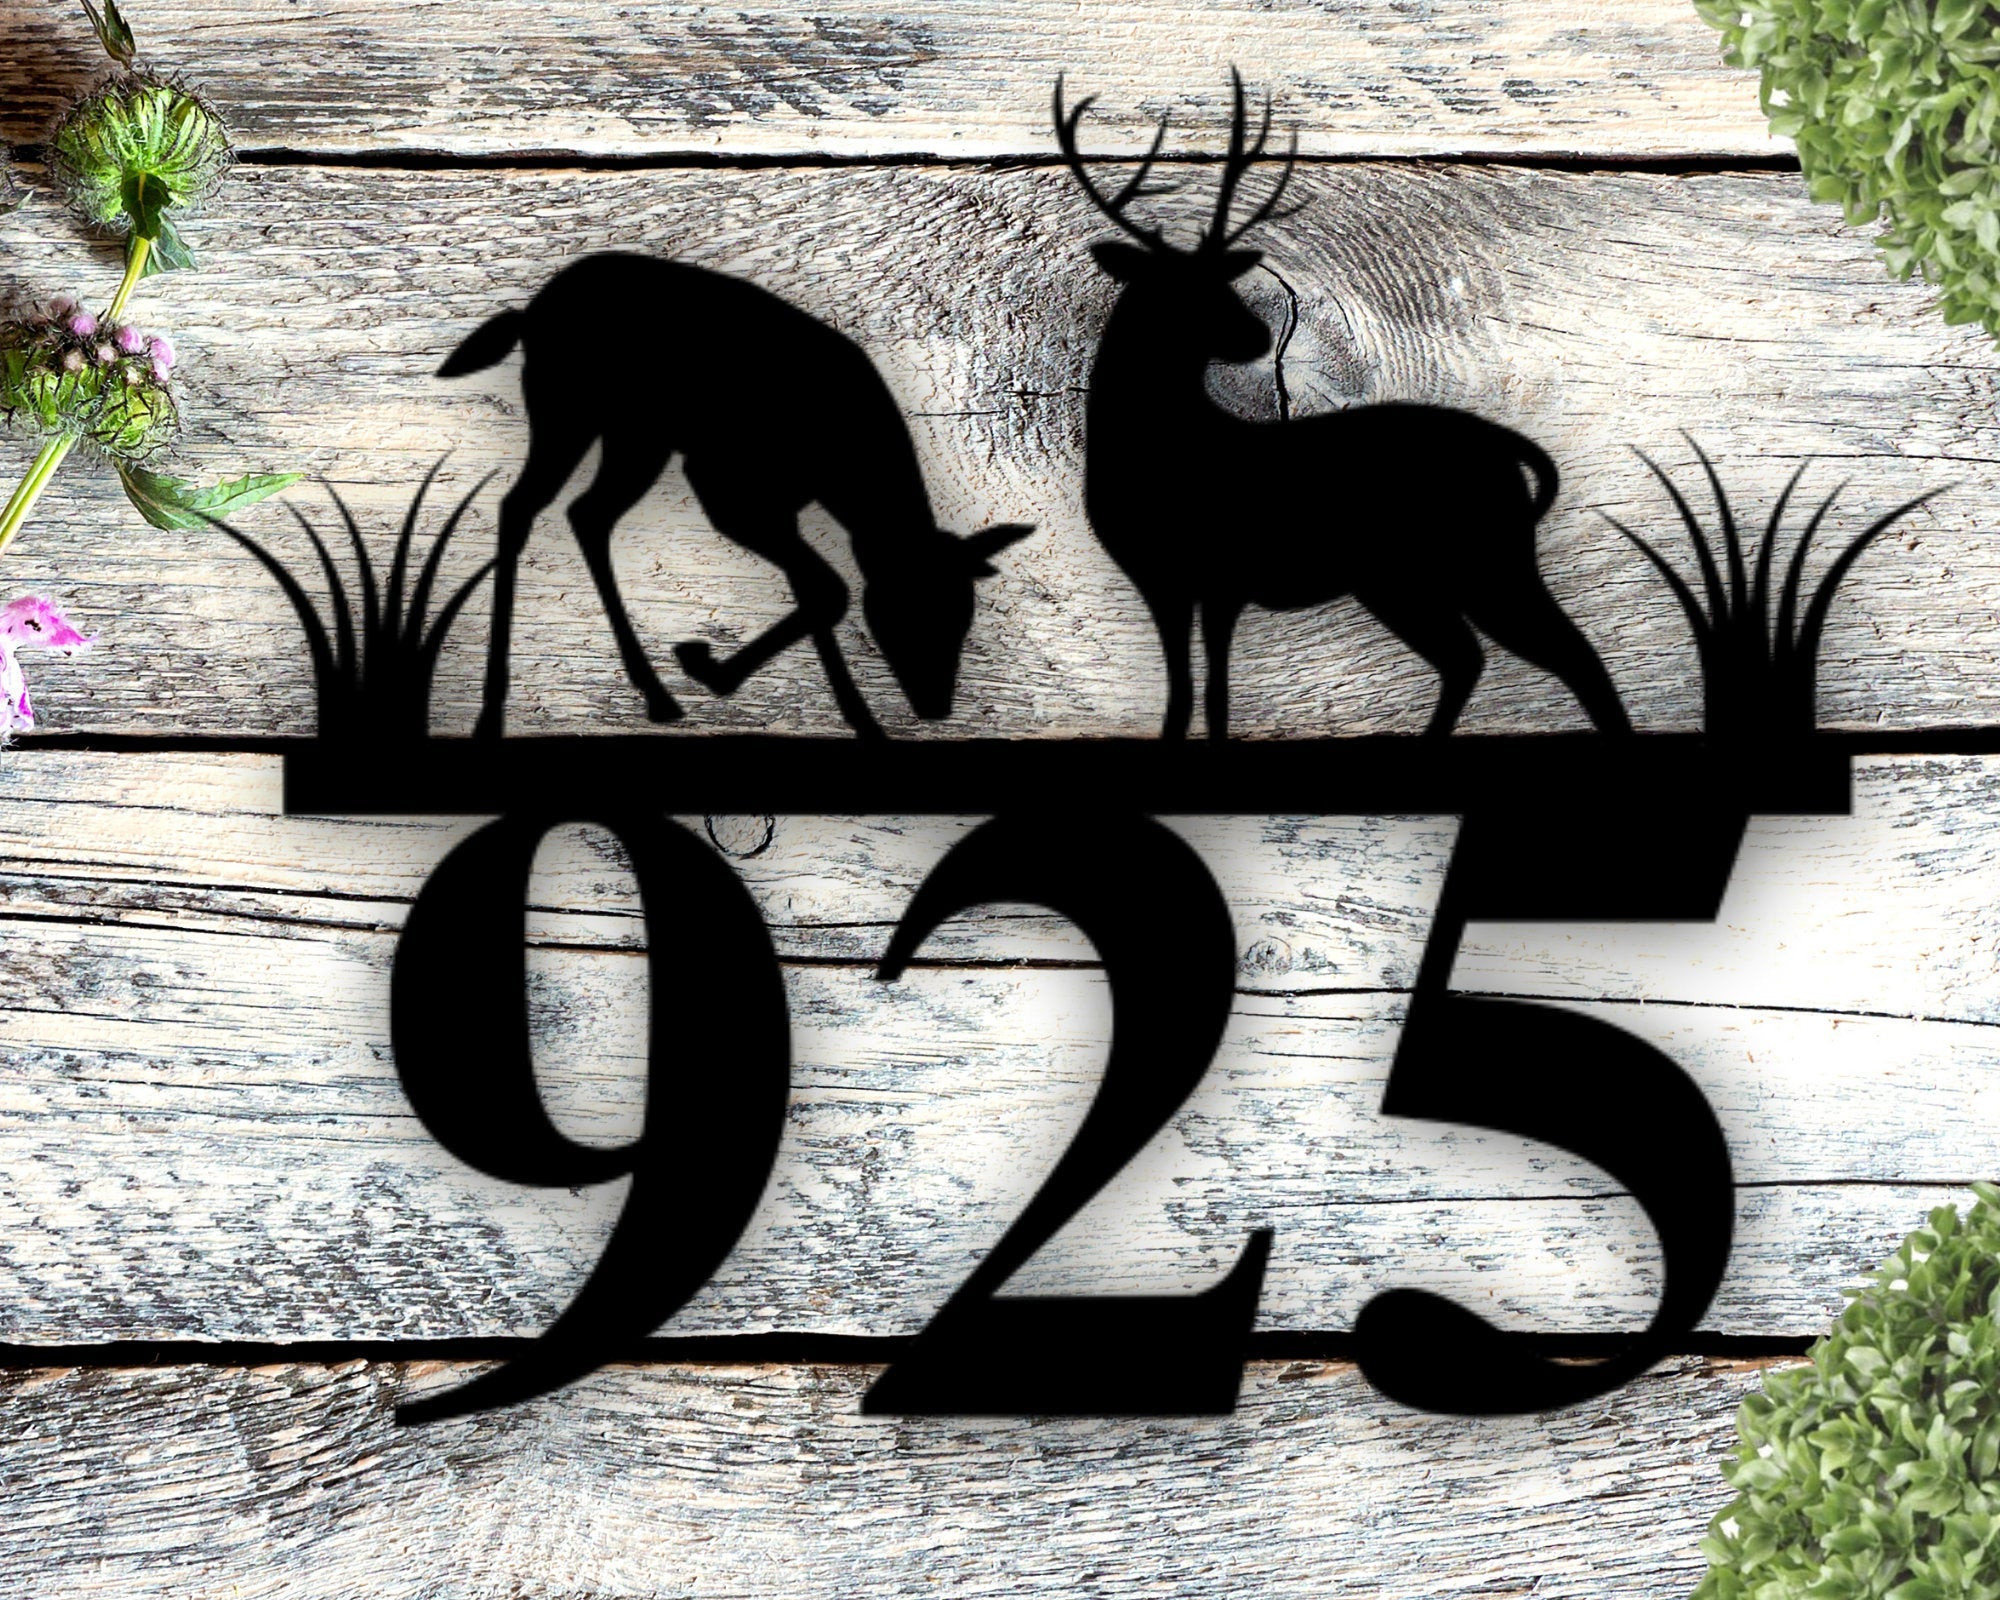 Custom Rustic Metal Address Sign Wilderness Sign Metal House Number Sign Outdoor Gift Ideas Address Plaque Housewarming Gift Laser Cut Metal Signs Custom Gift Ideas 12x12IN